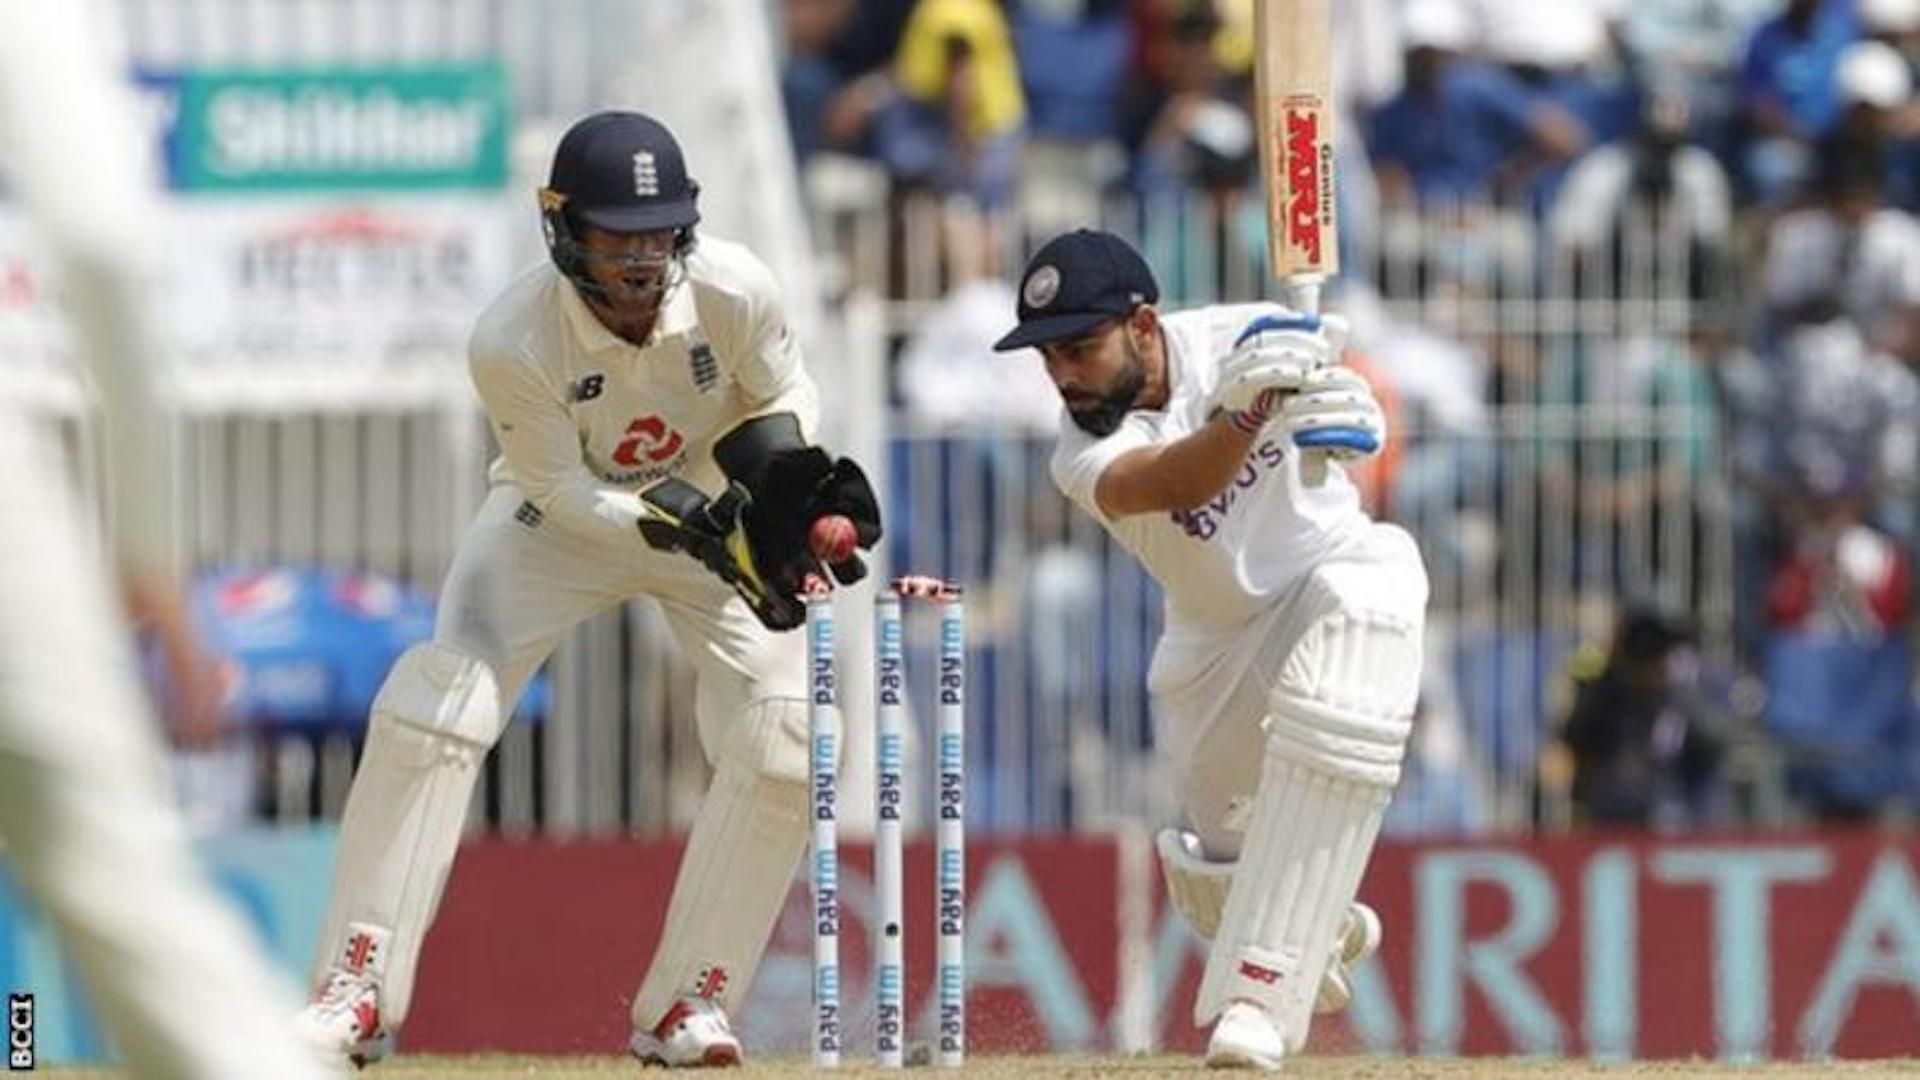 Virat Kohli bowled by Moeen Ali in Chennai in the 2nd Test in 2021. Source: BBC